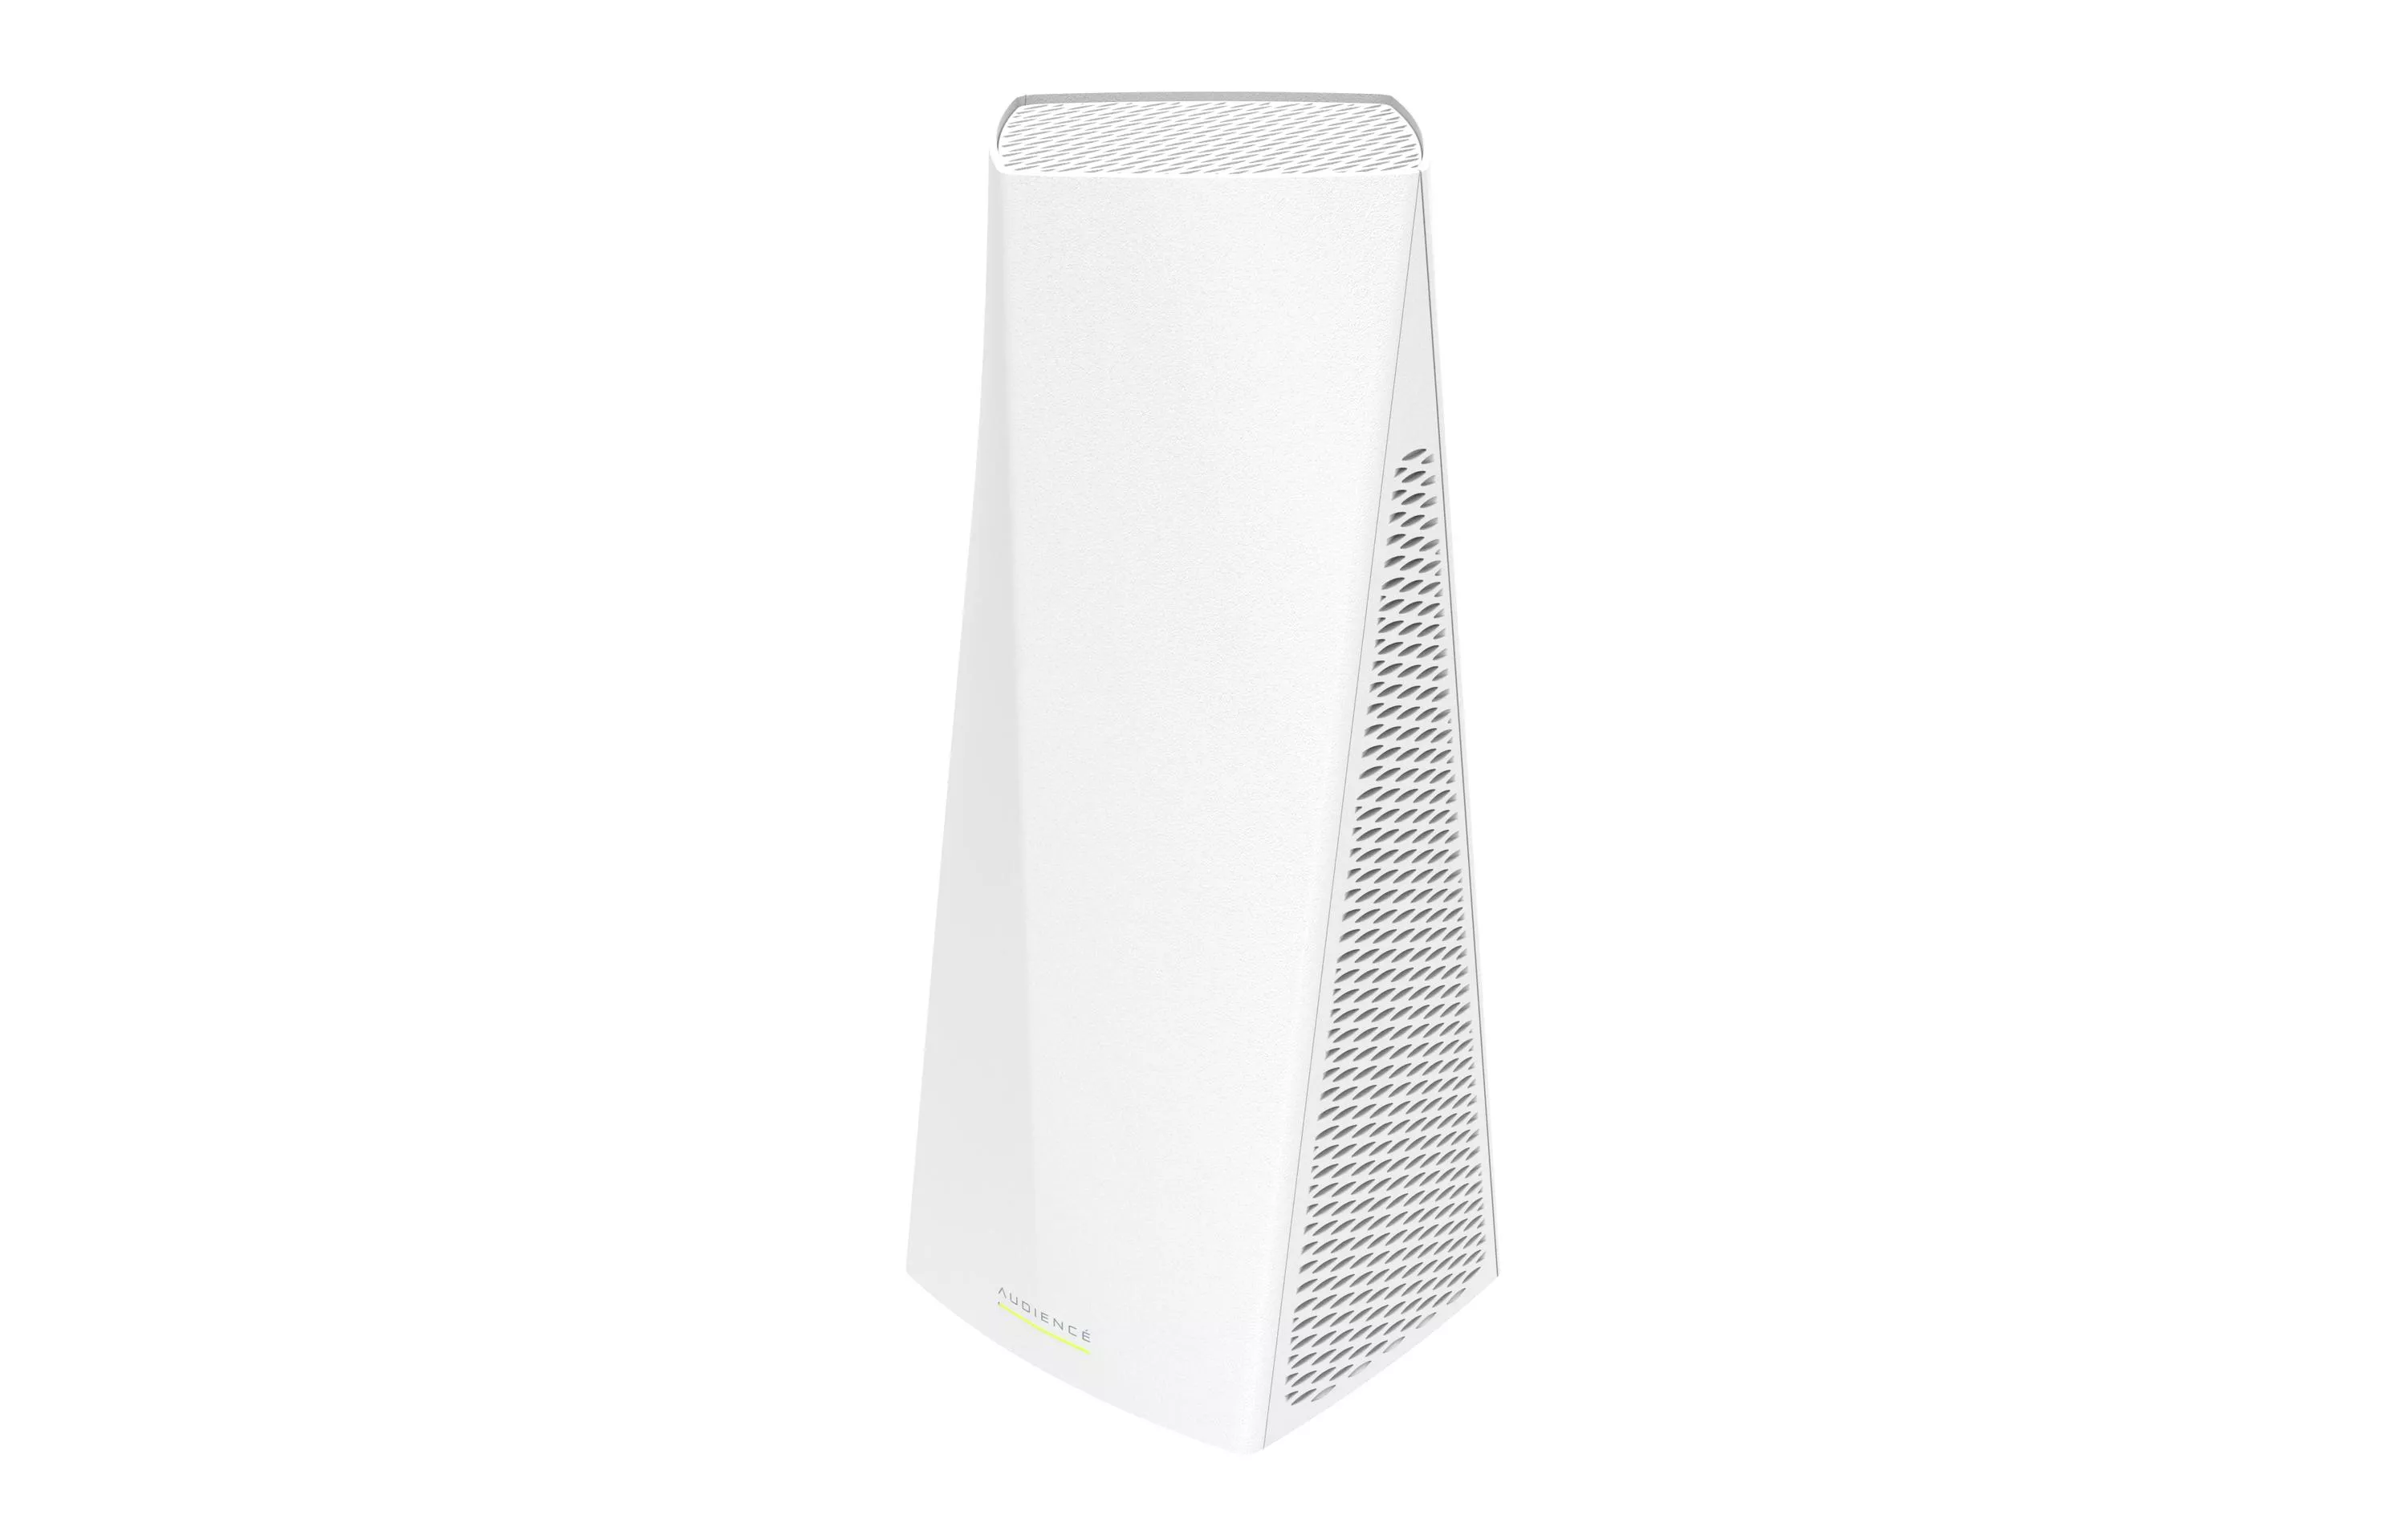 Mesh Access Point AUDIENCE Tri-Band Mesh